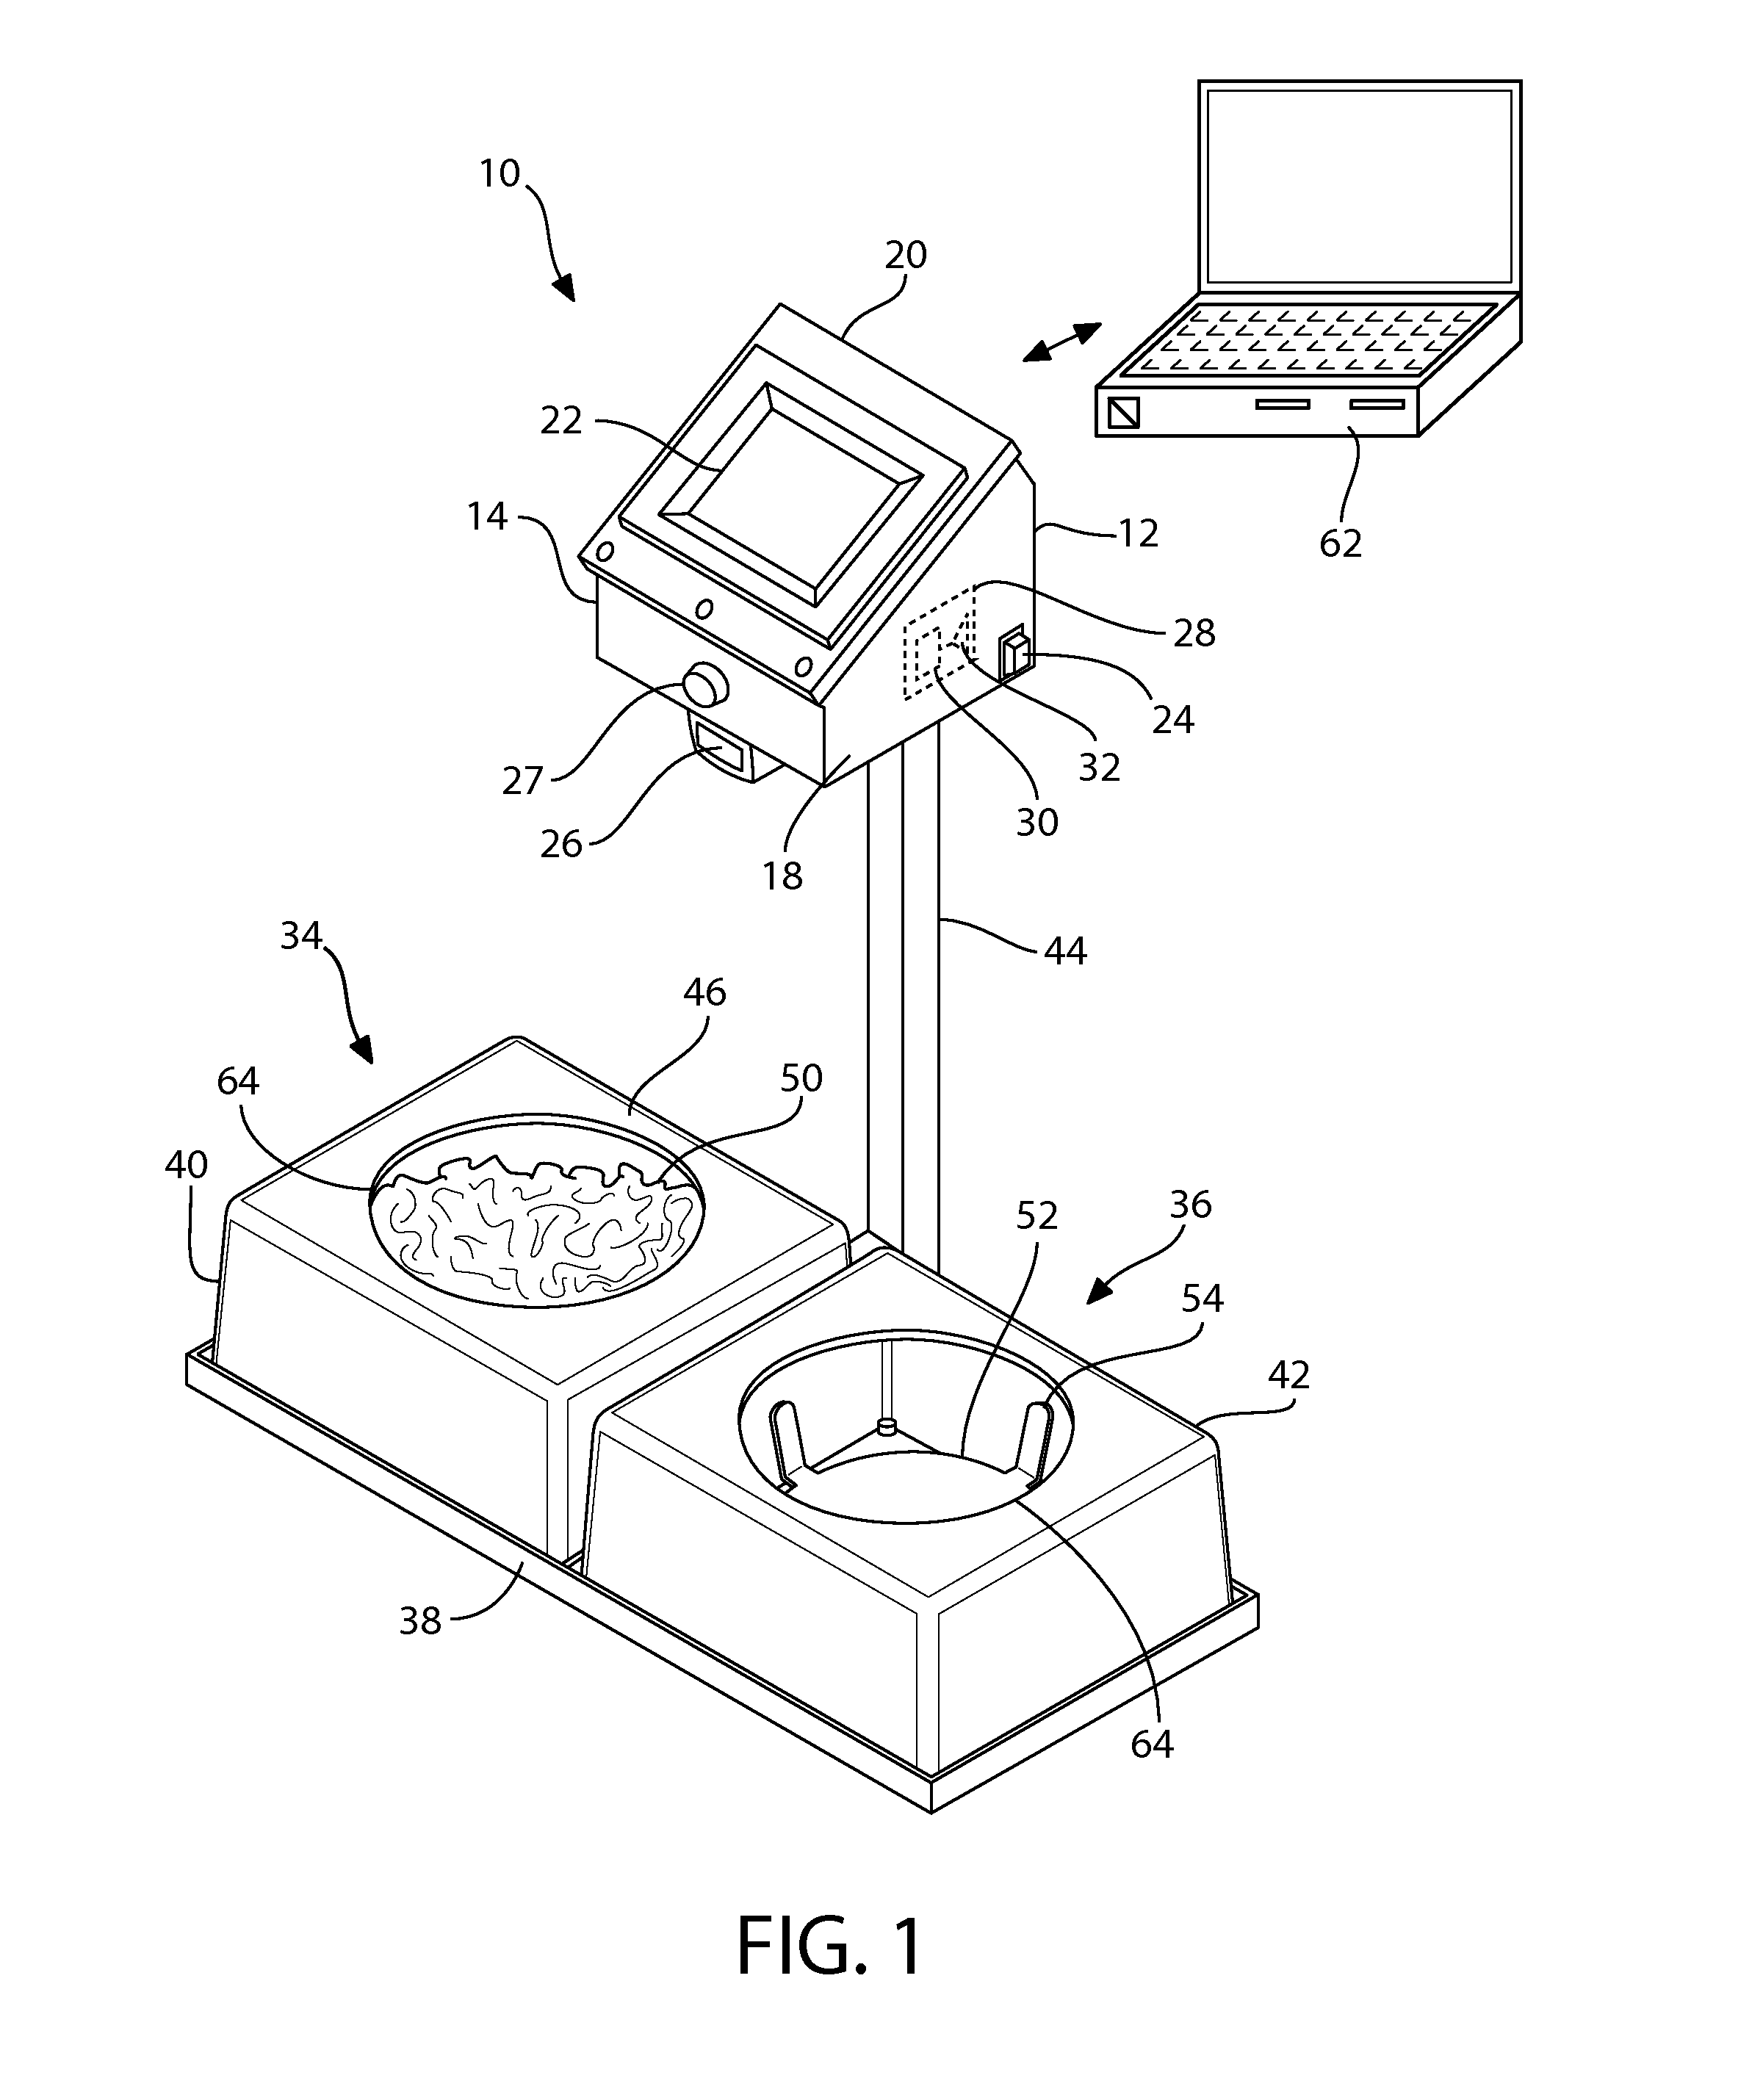 Automated feeding station for in-house companion animal testing